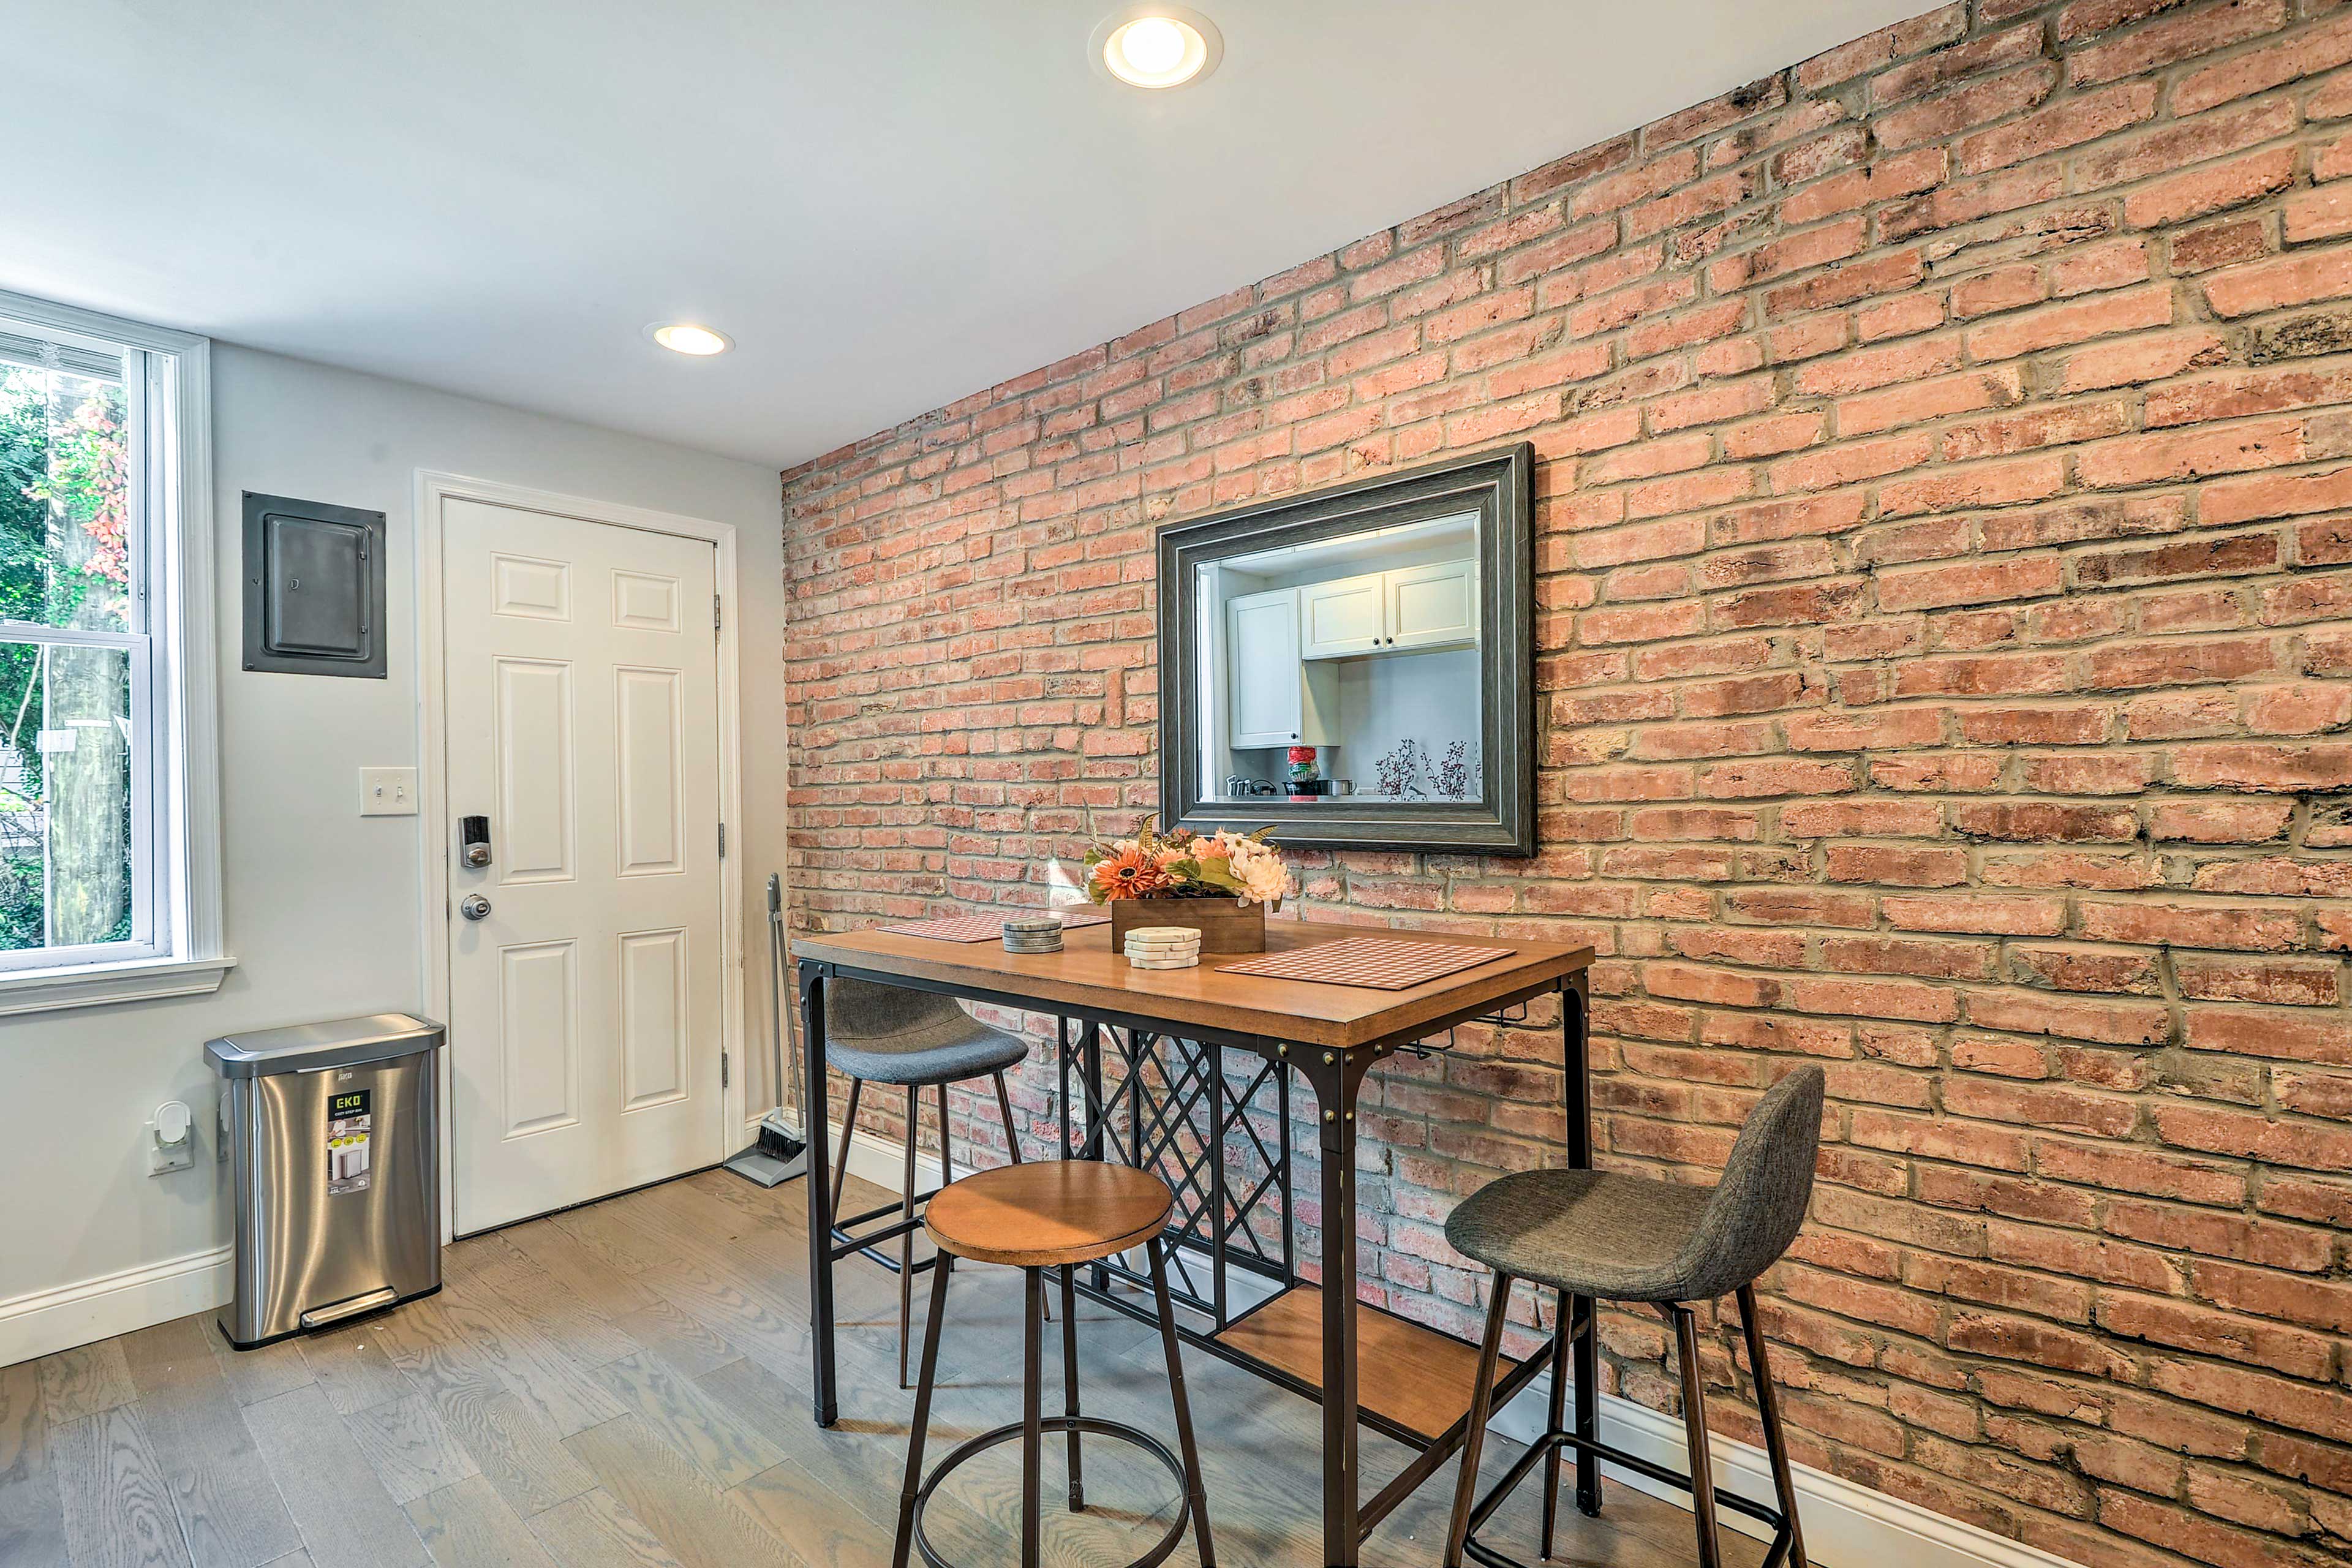 Central & Trendy Baltimore Townhome: Pets OK!